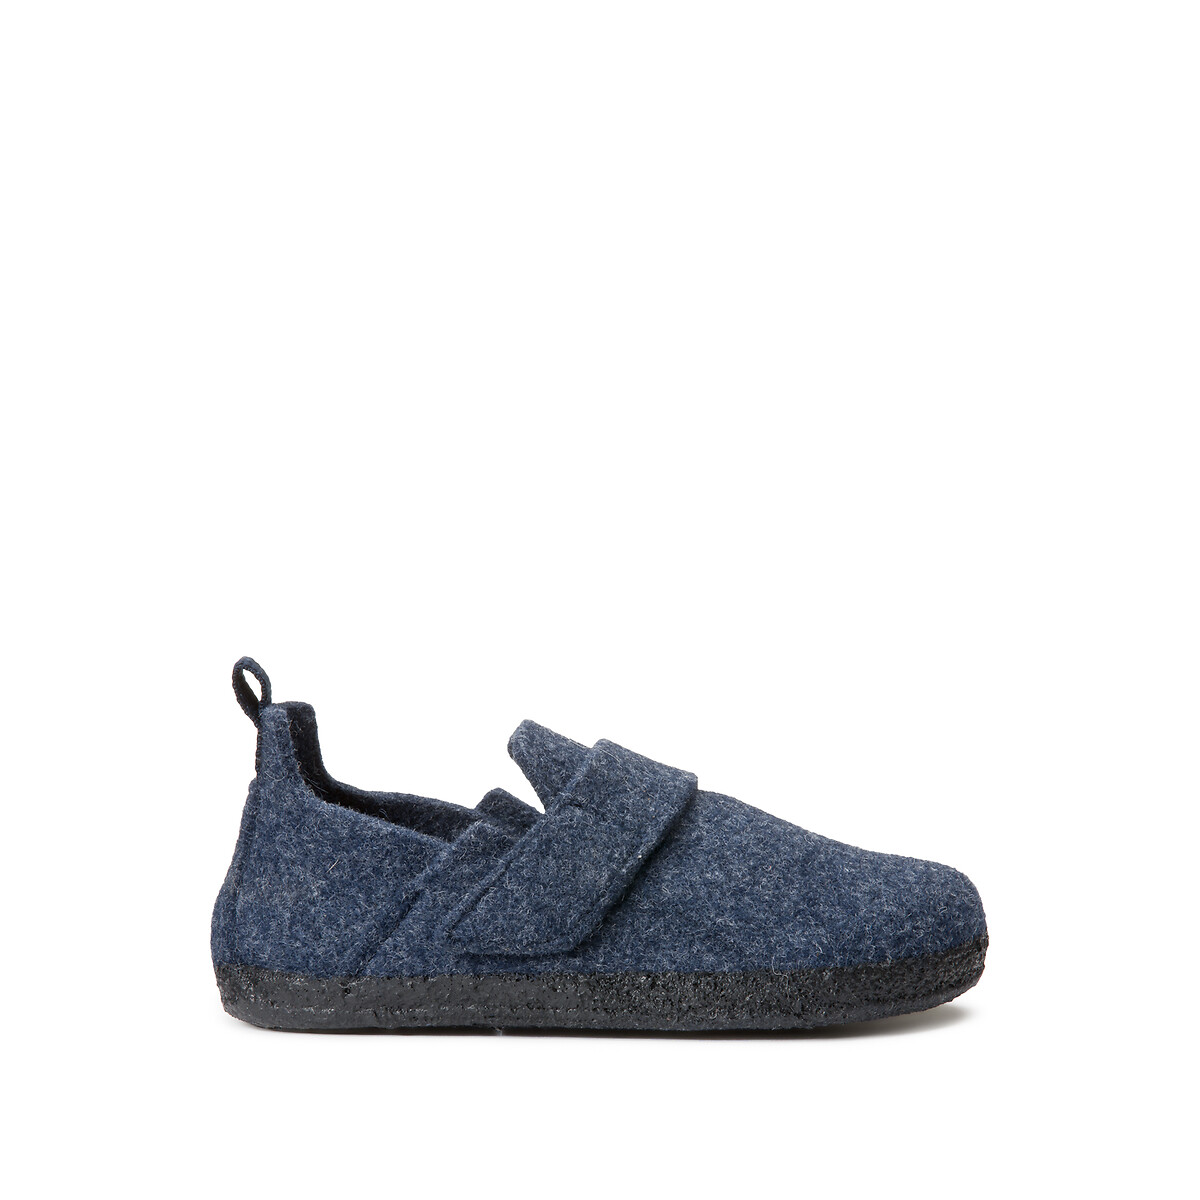 Image of Kids Zermatt HL Slippers in Wool with Touch 'n' Close Fastening, Made in Europe